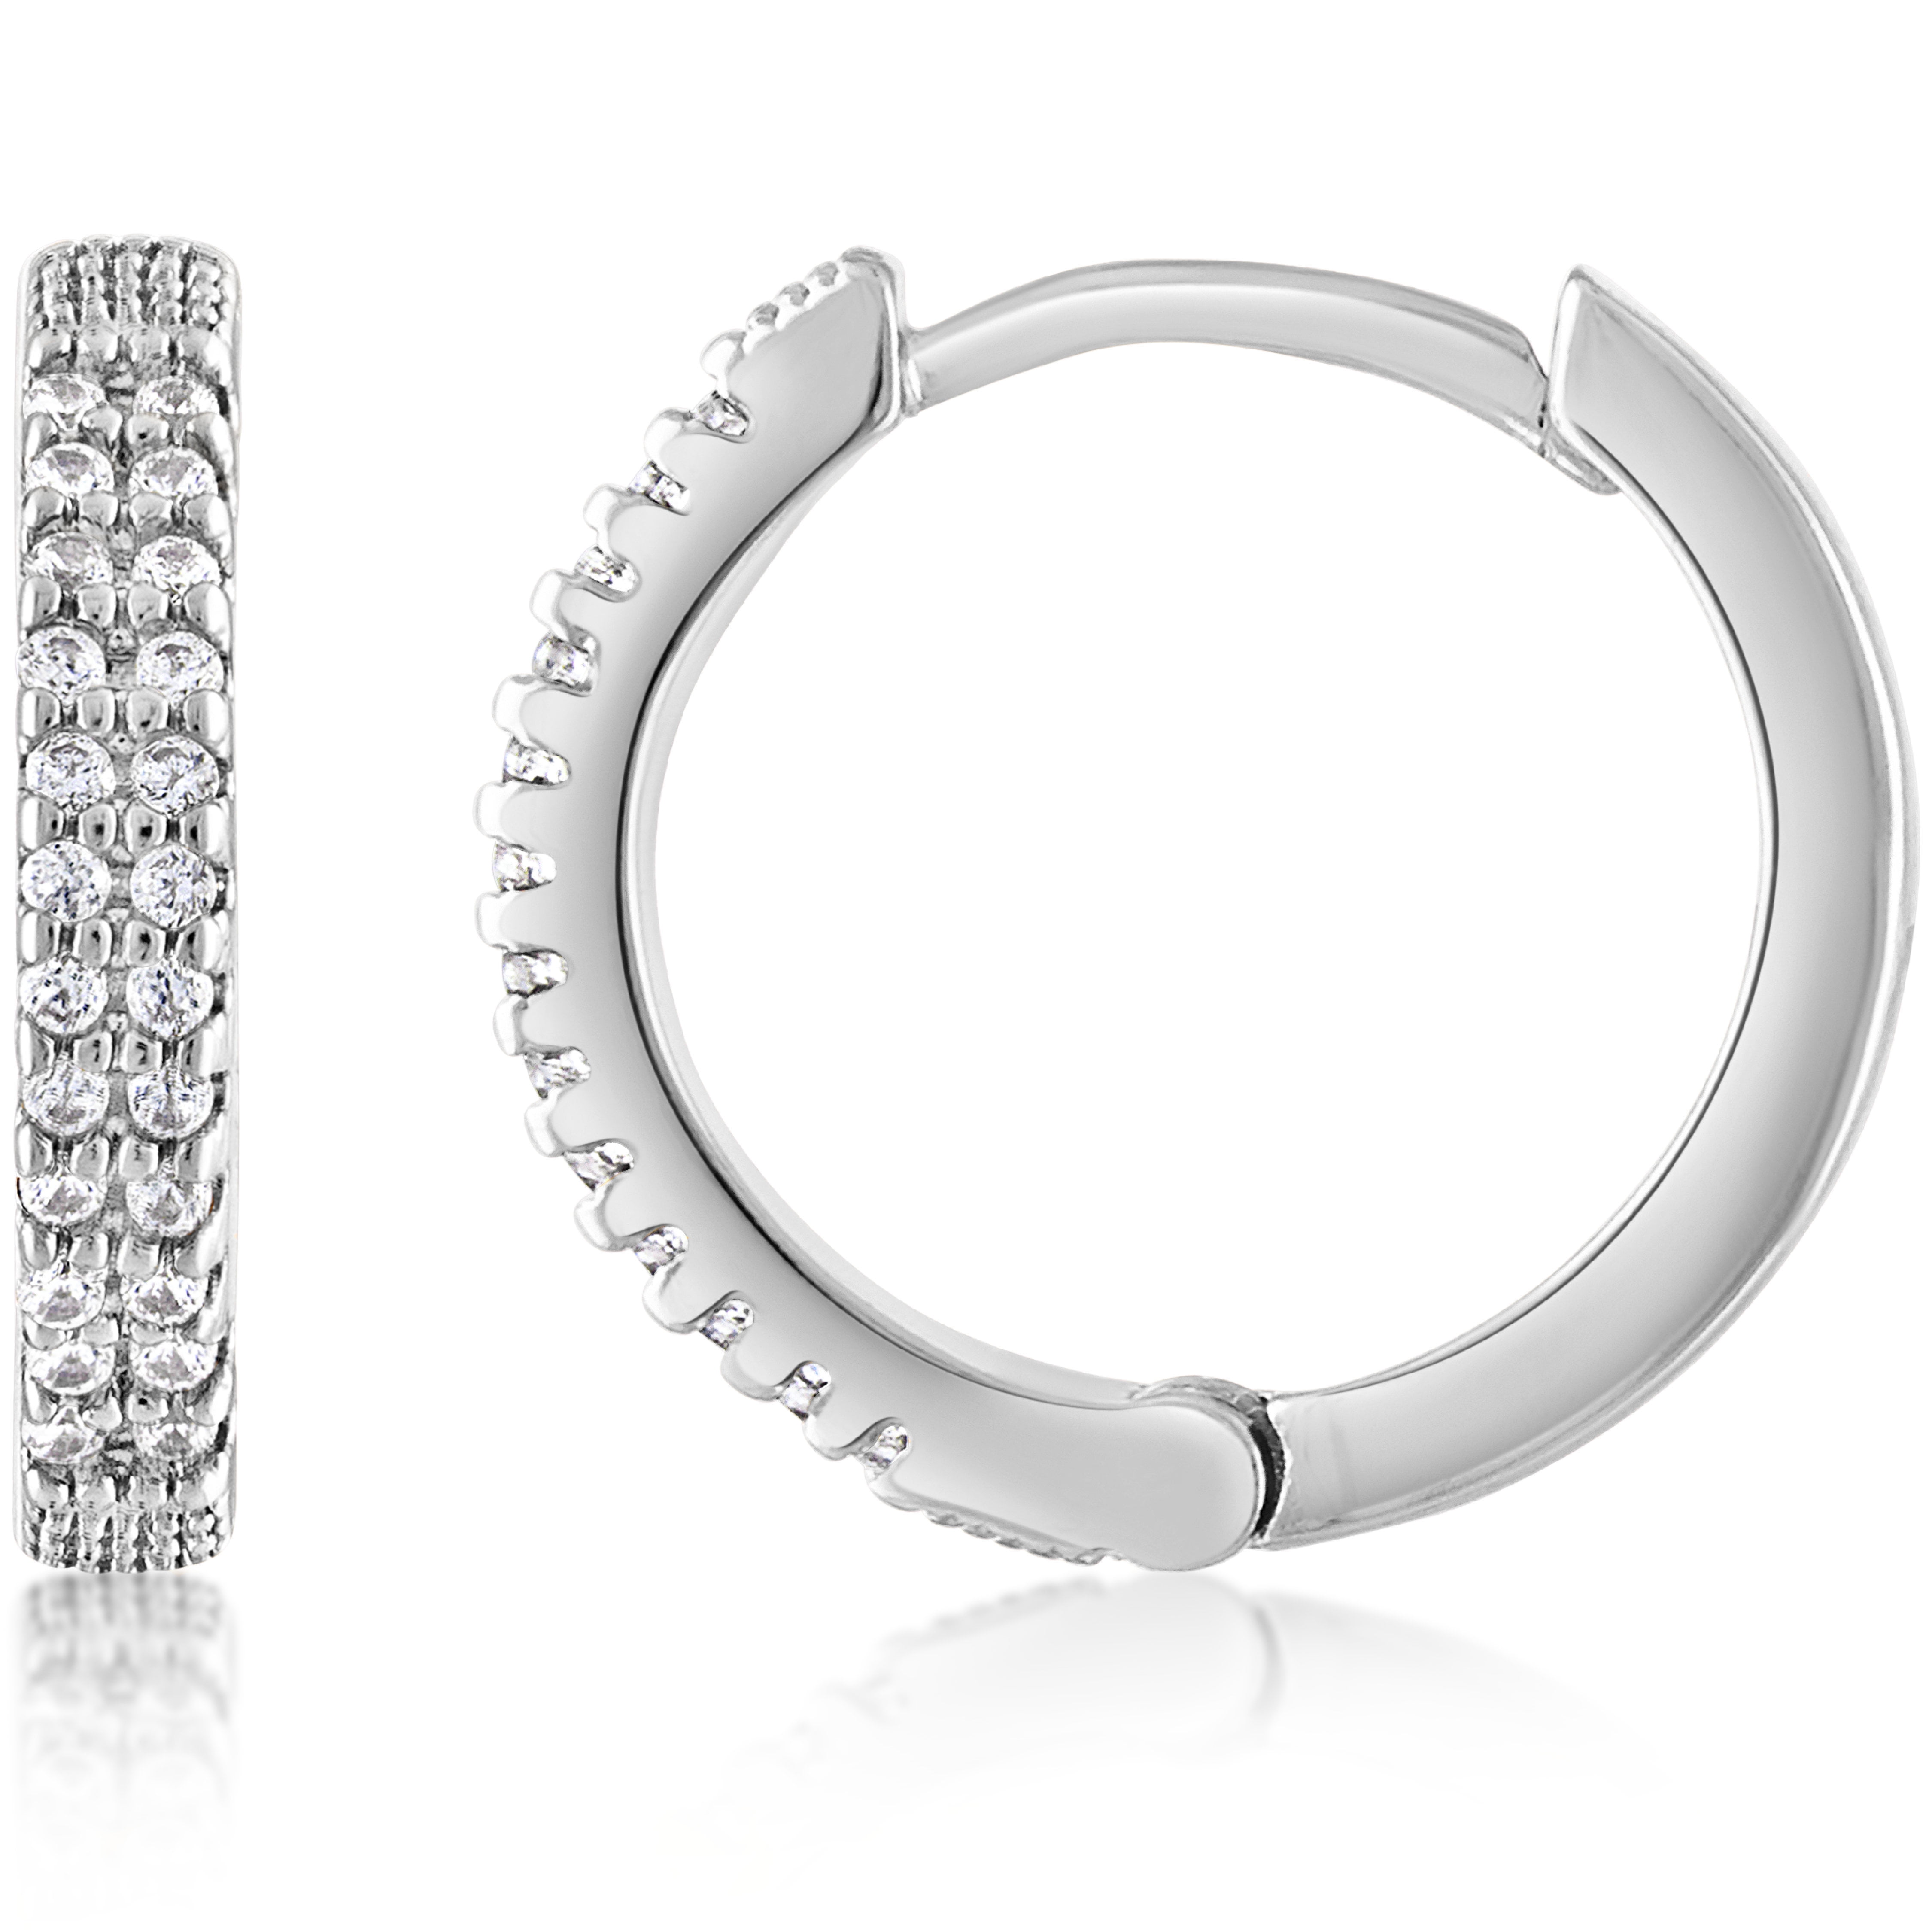 SHIMMER Thin 18kt White Gold Plated Inside Outside CZ Crystals Hoop Earrings 